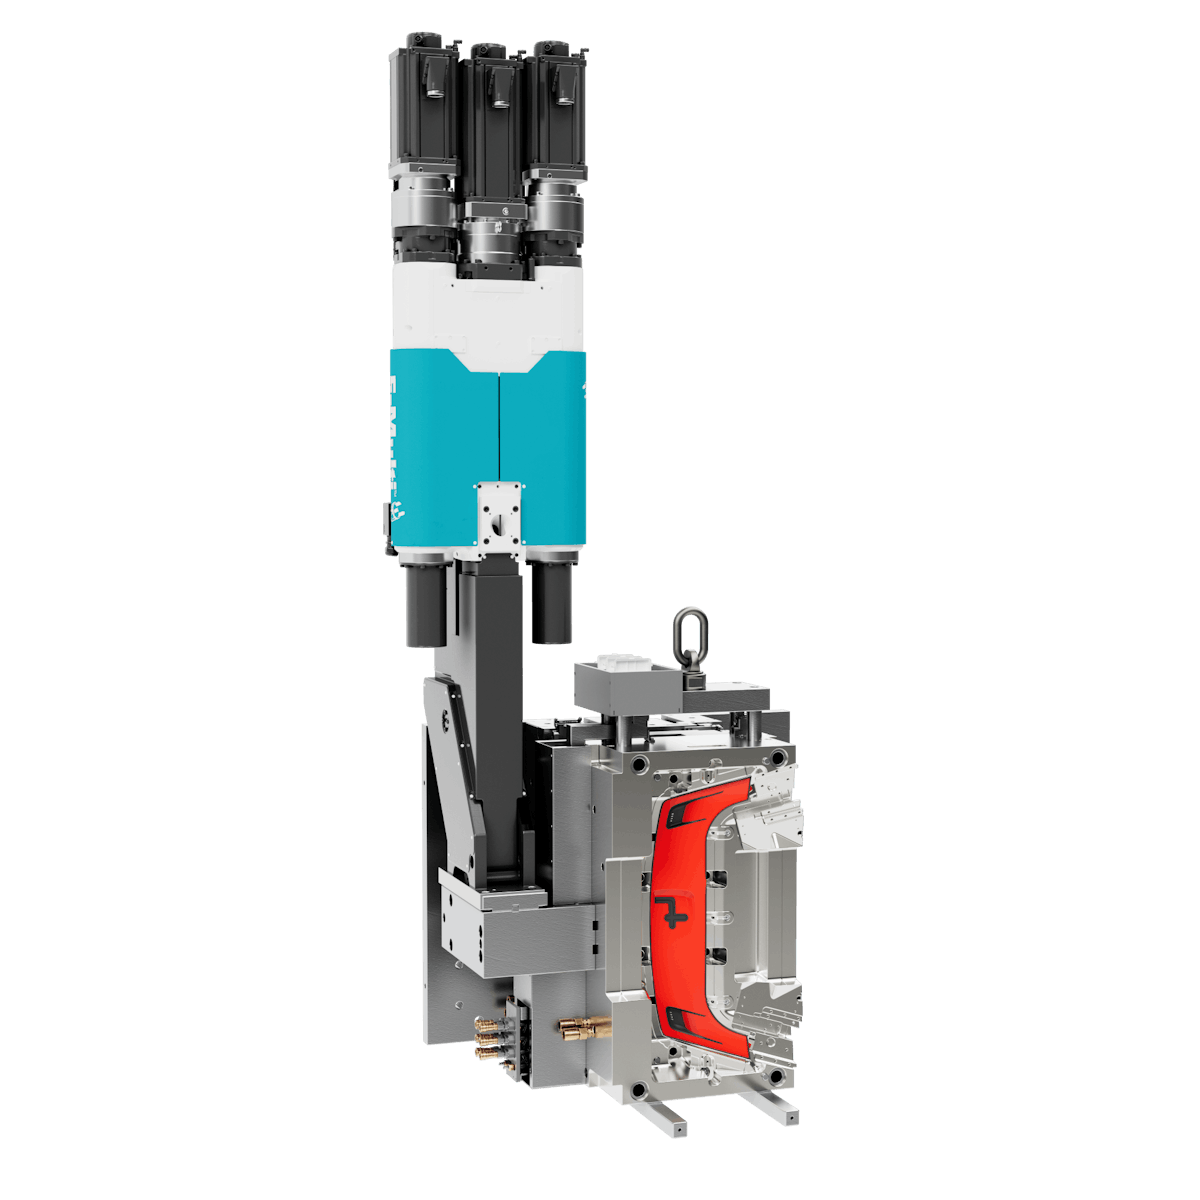 Mold-Masters says its E-Multi units can add multi-shot molding capabilities to injection molding machines without putting a strain on processors&apos; space or budgets.